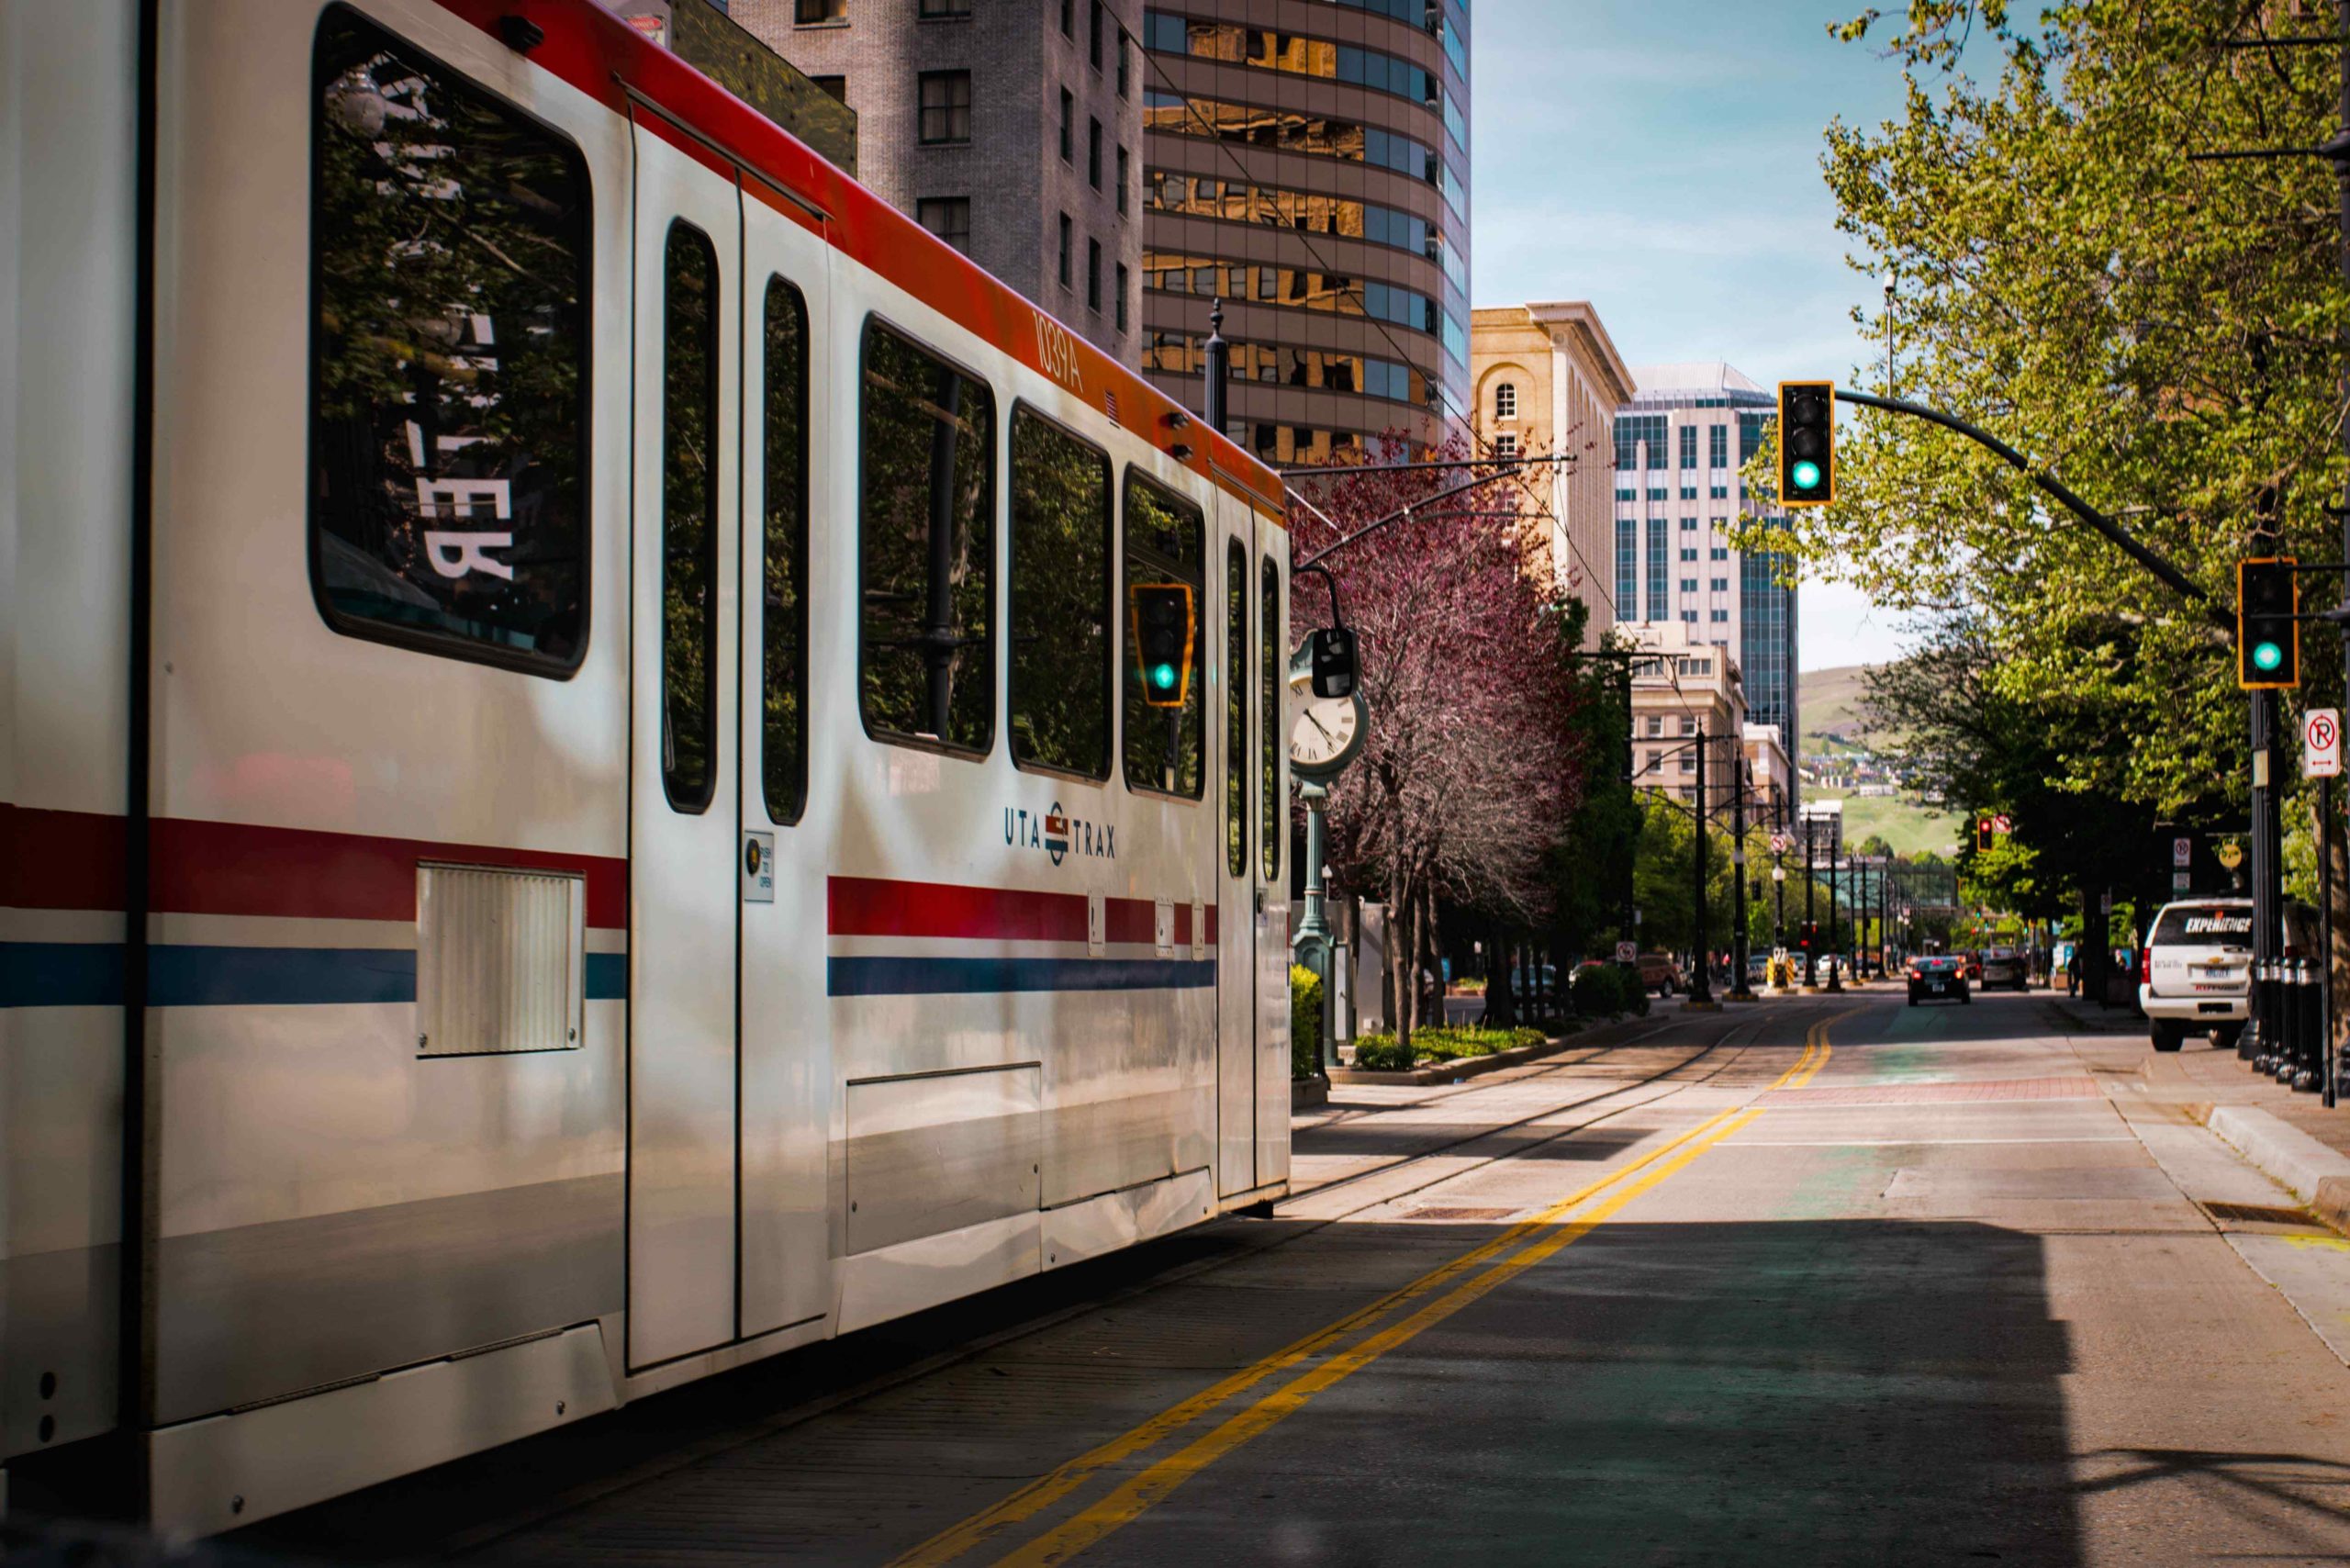 Get around downtown Salt Lake City using the Trax system